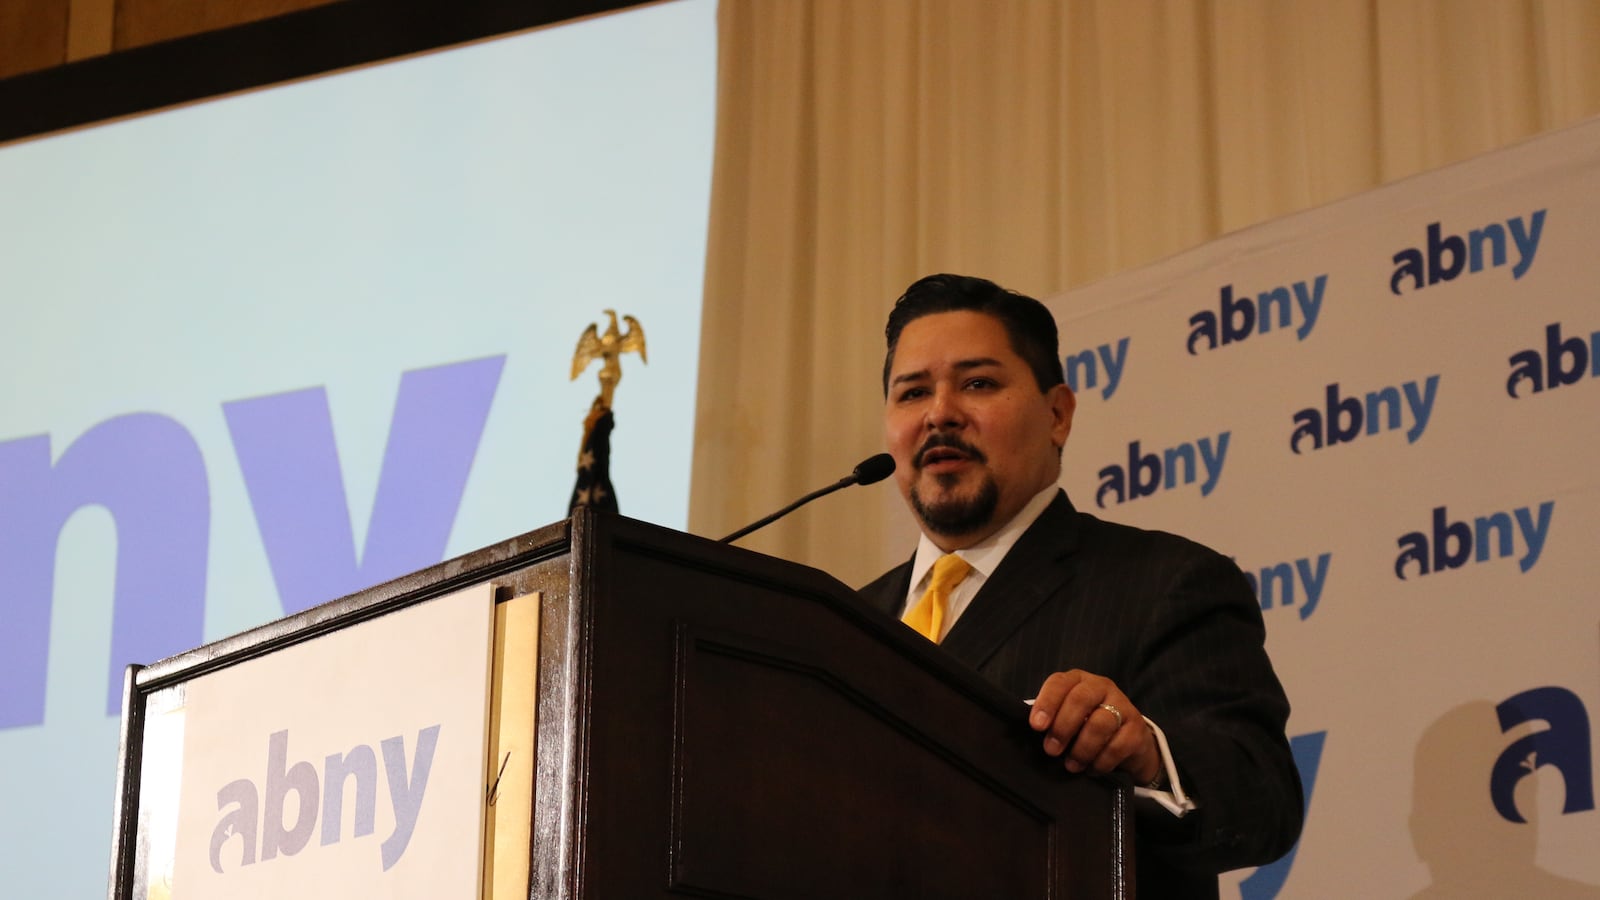 Richard Carranza, pictured here last month, announced new supports for homeless students.